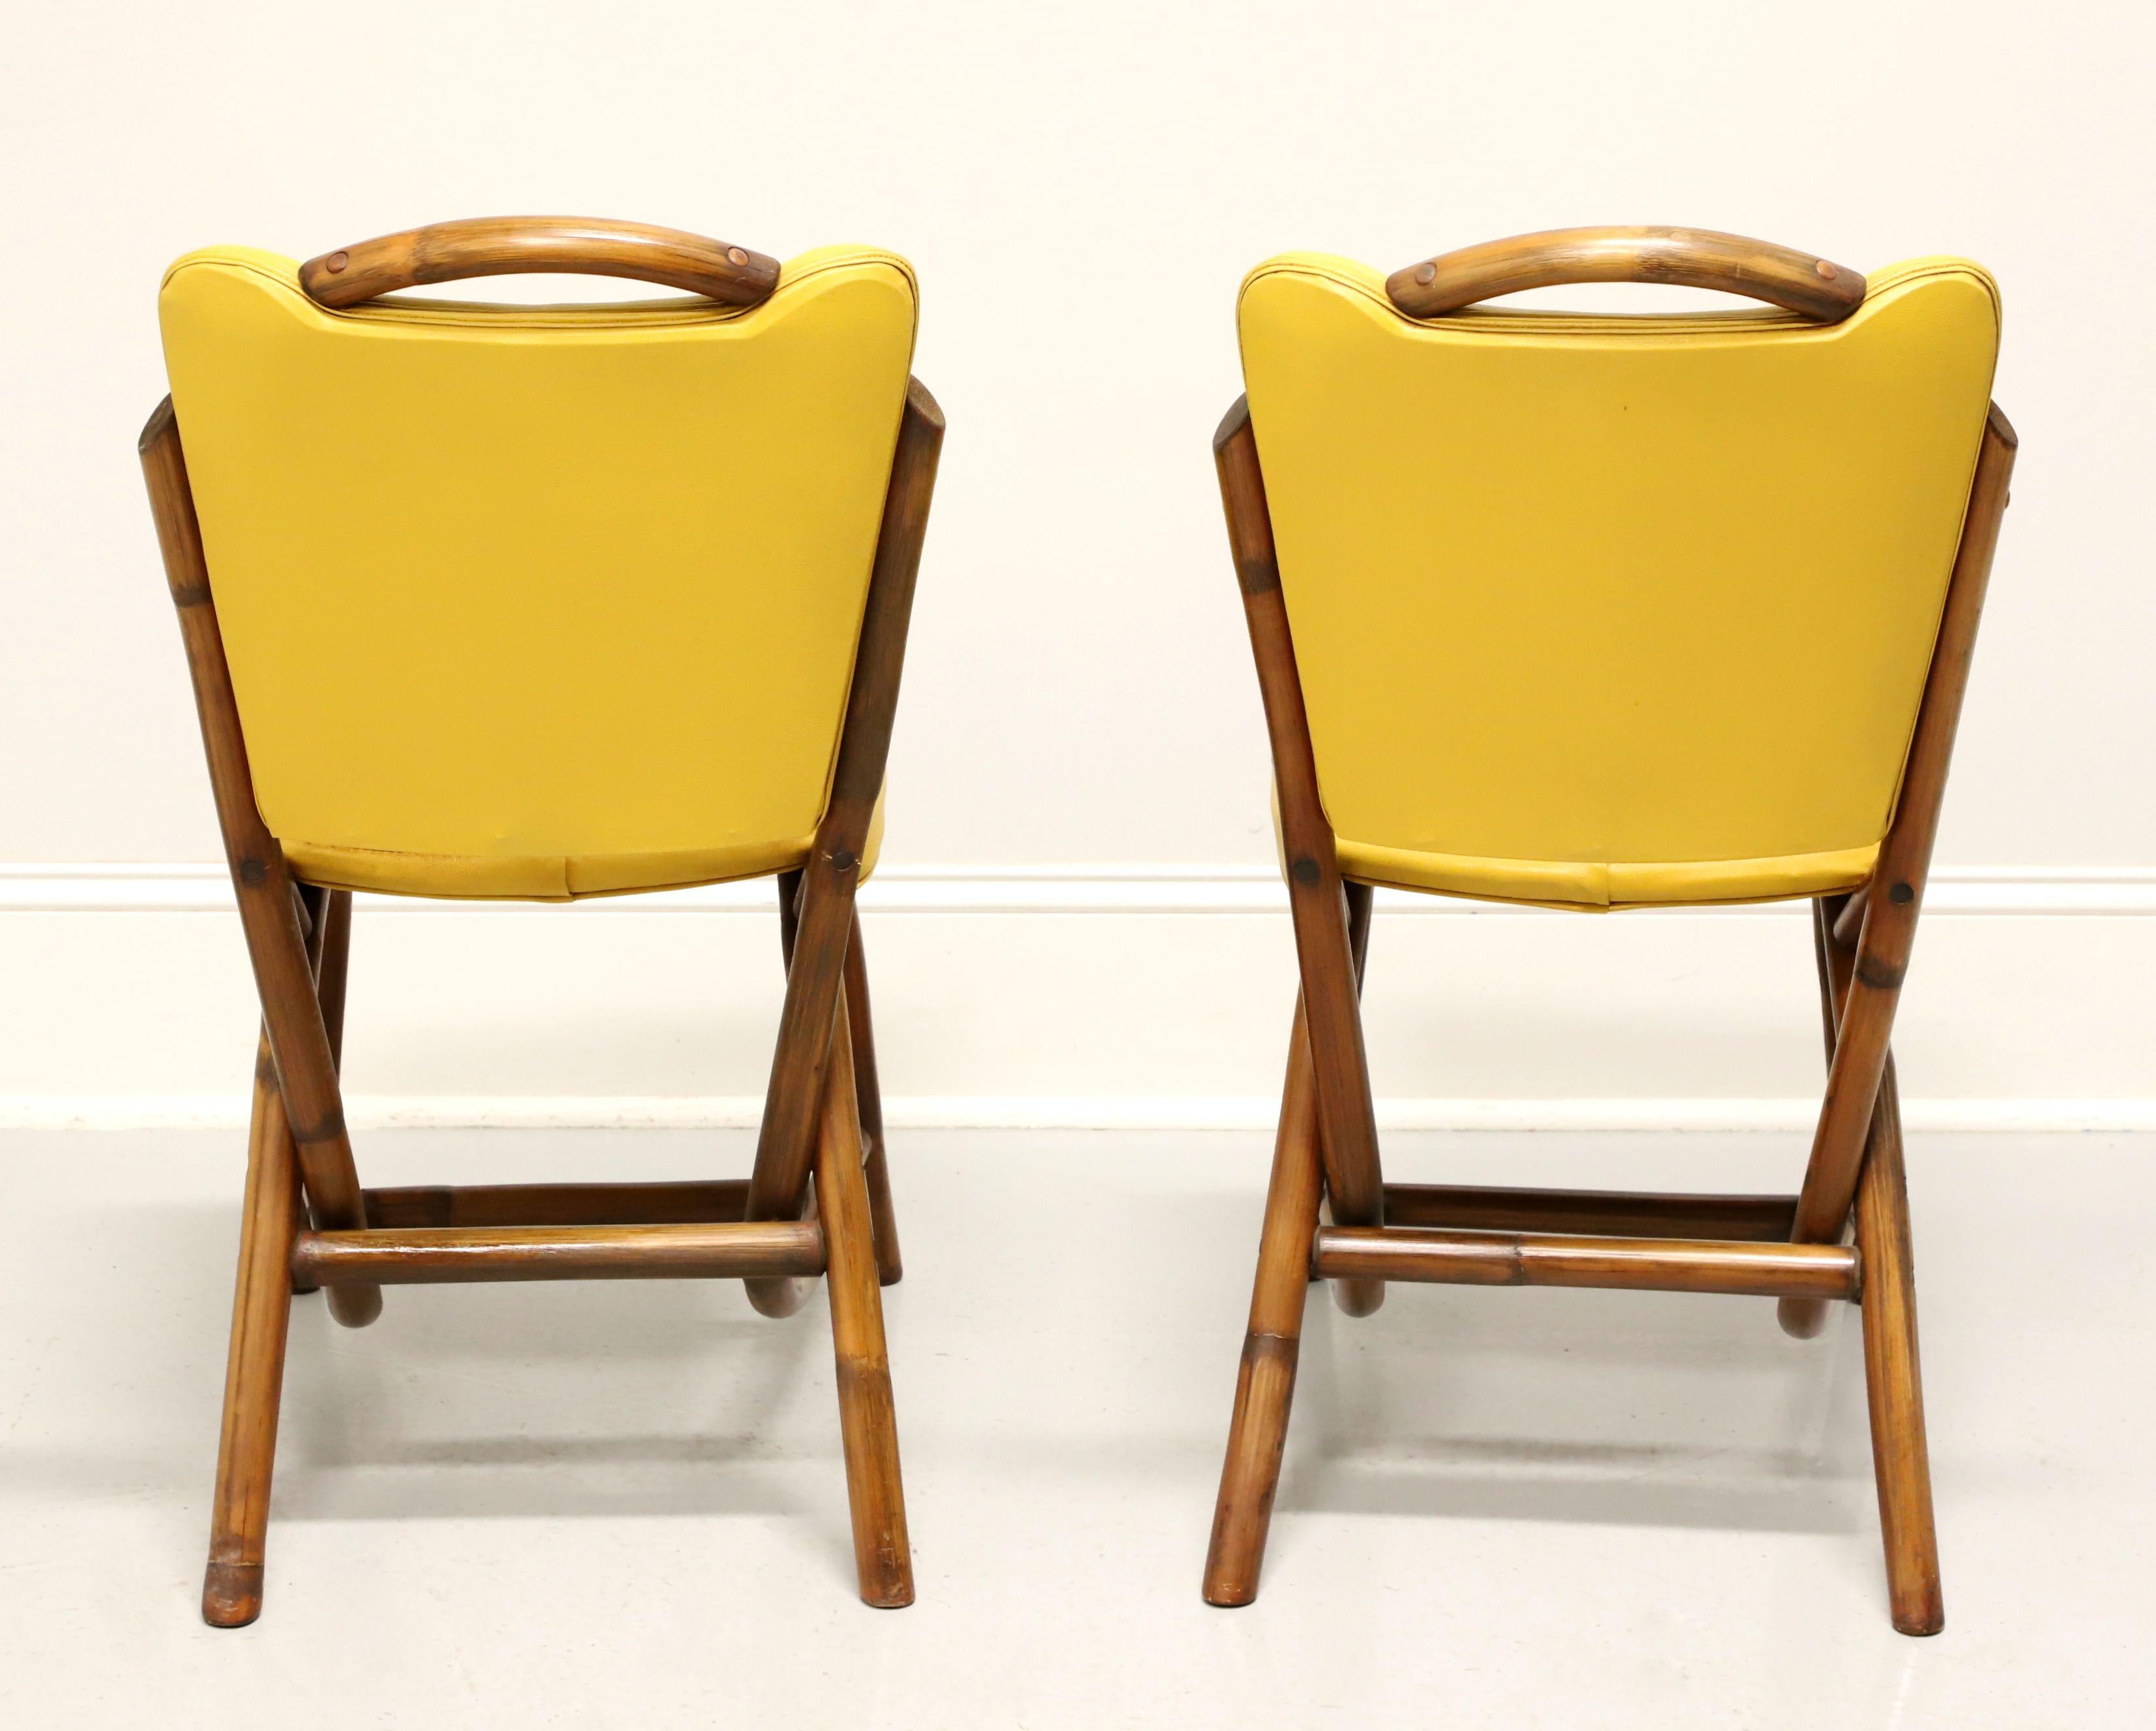 BAM-TAN 1960's Rattan Dining Side Chairs - Pair A In Good Condition For Sale In Charlotte, NC